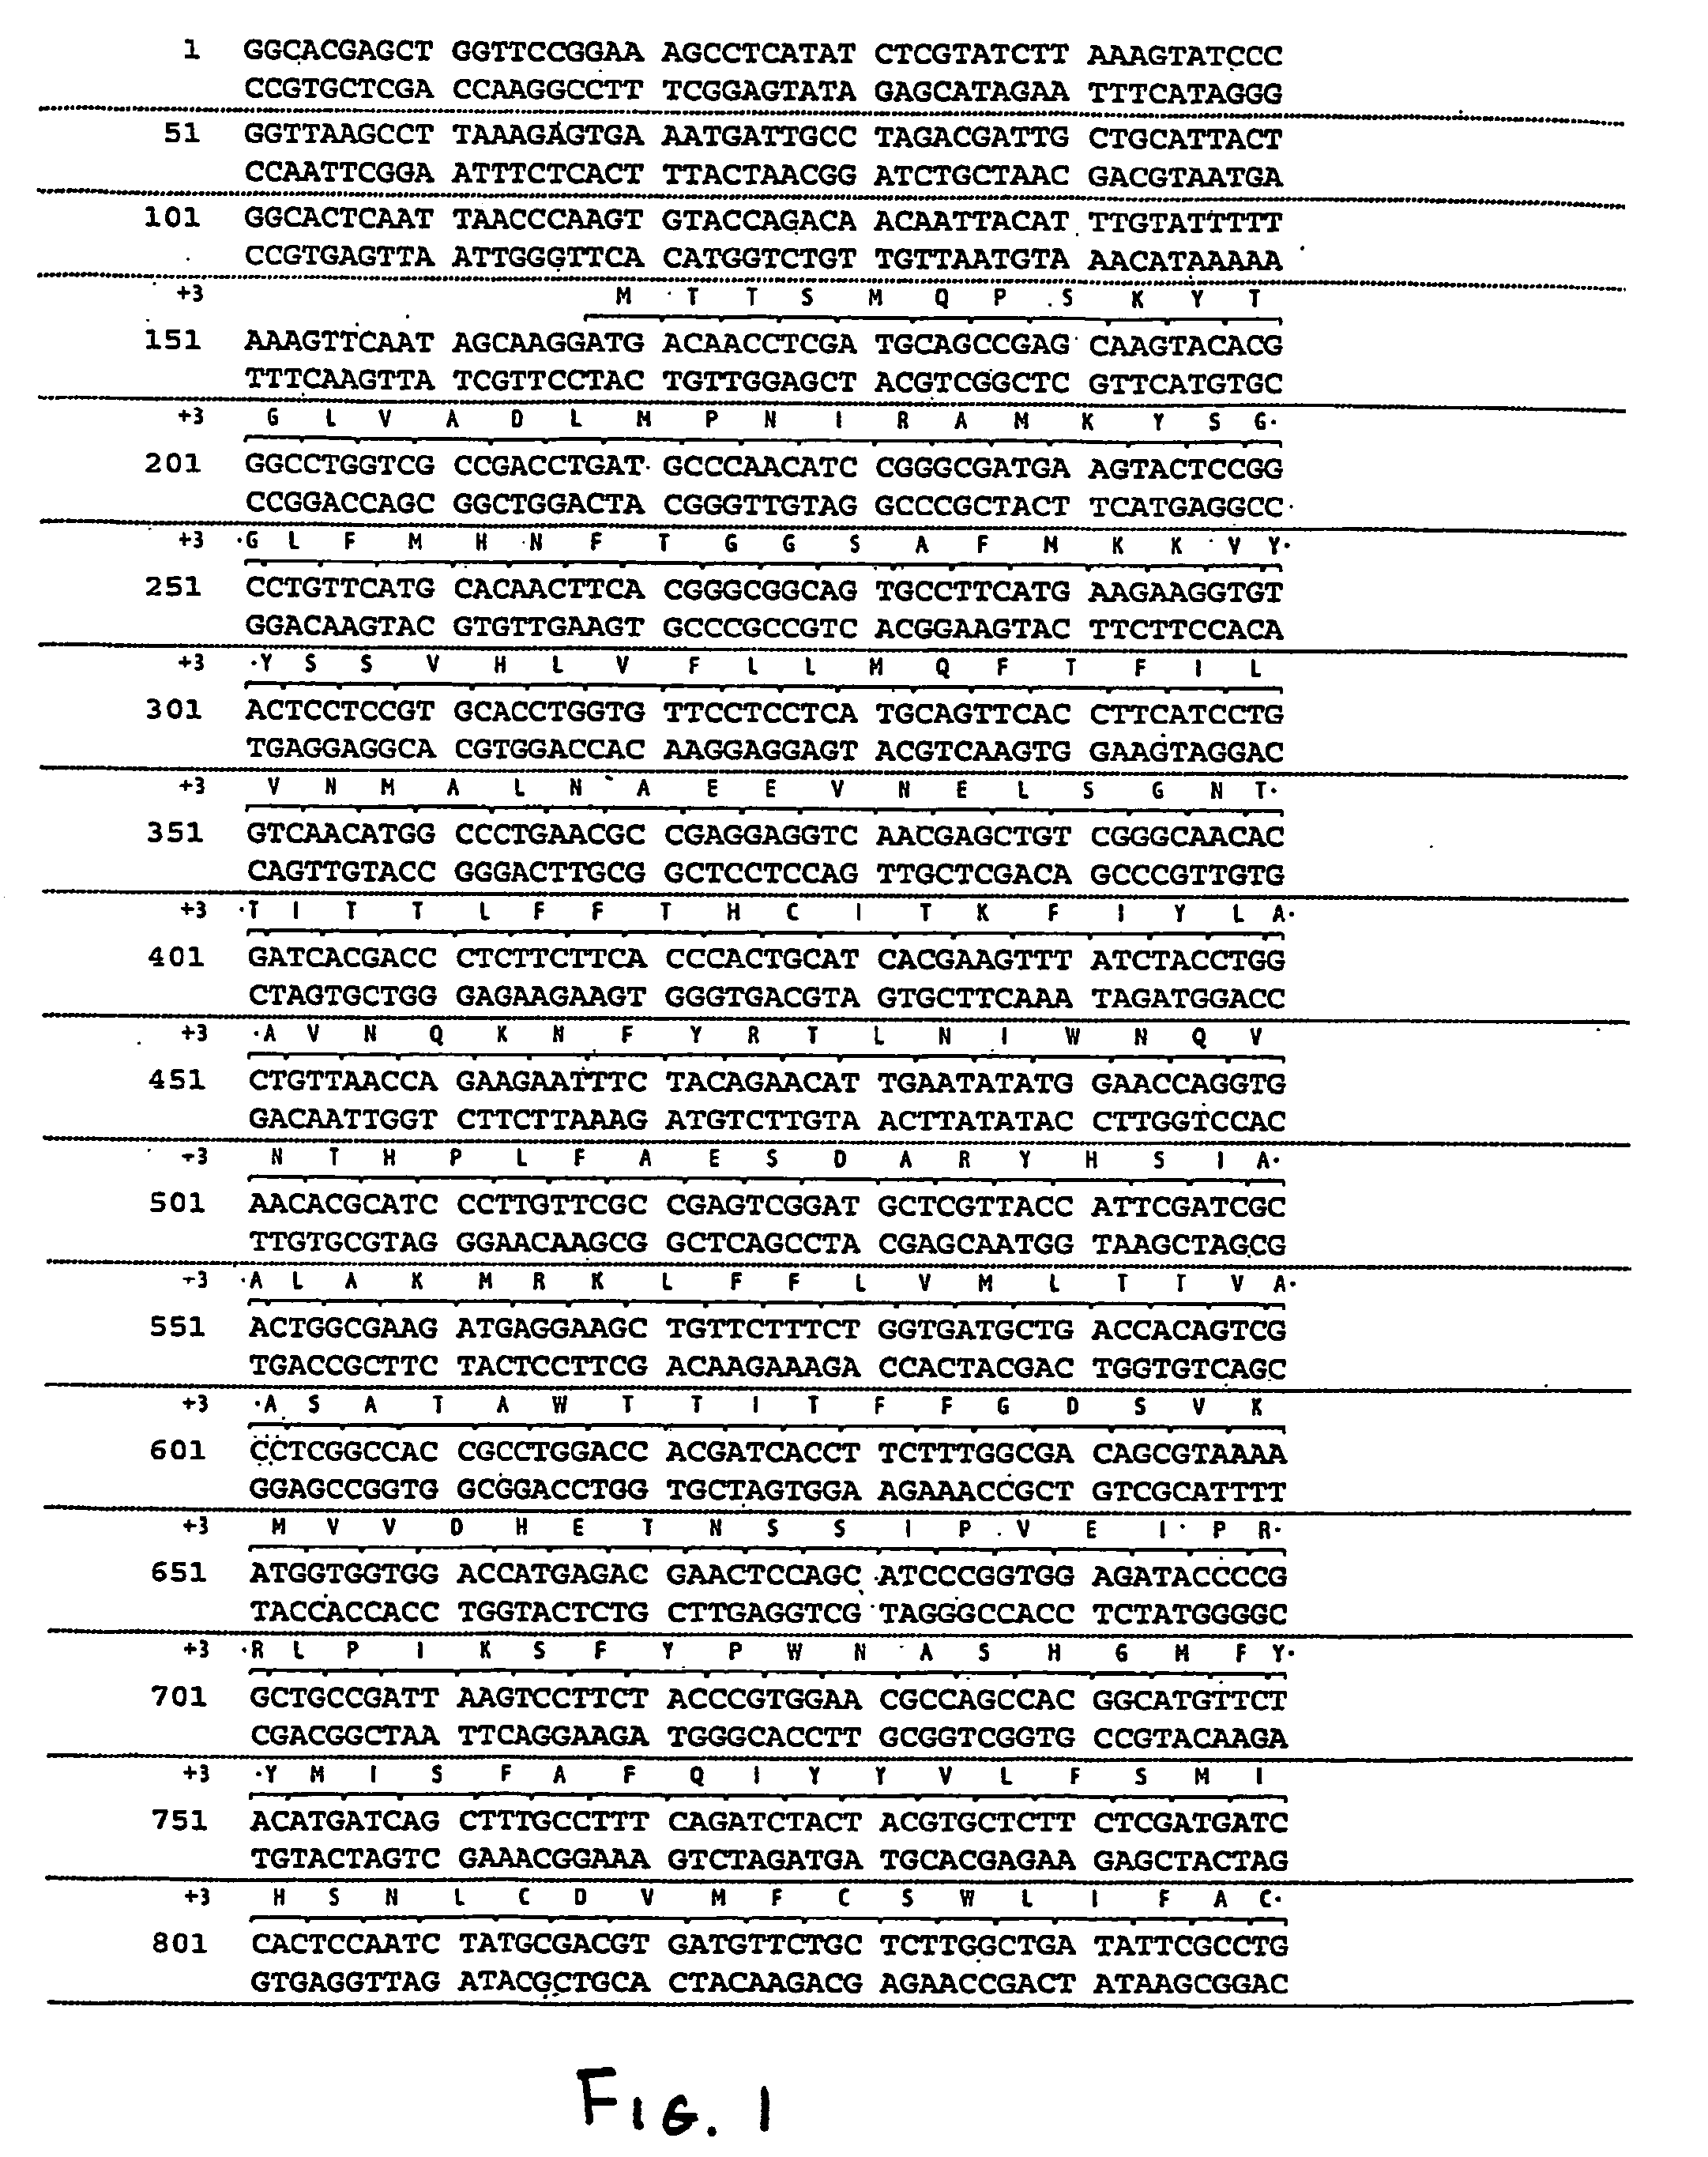 Nucleic acids and proteins of insect or83b odorant receptor genes and uses thereof